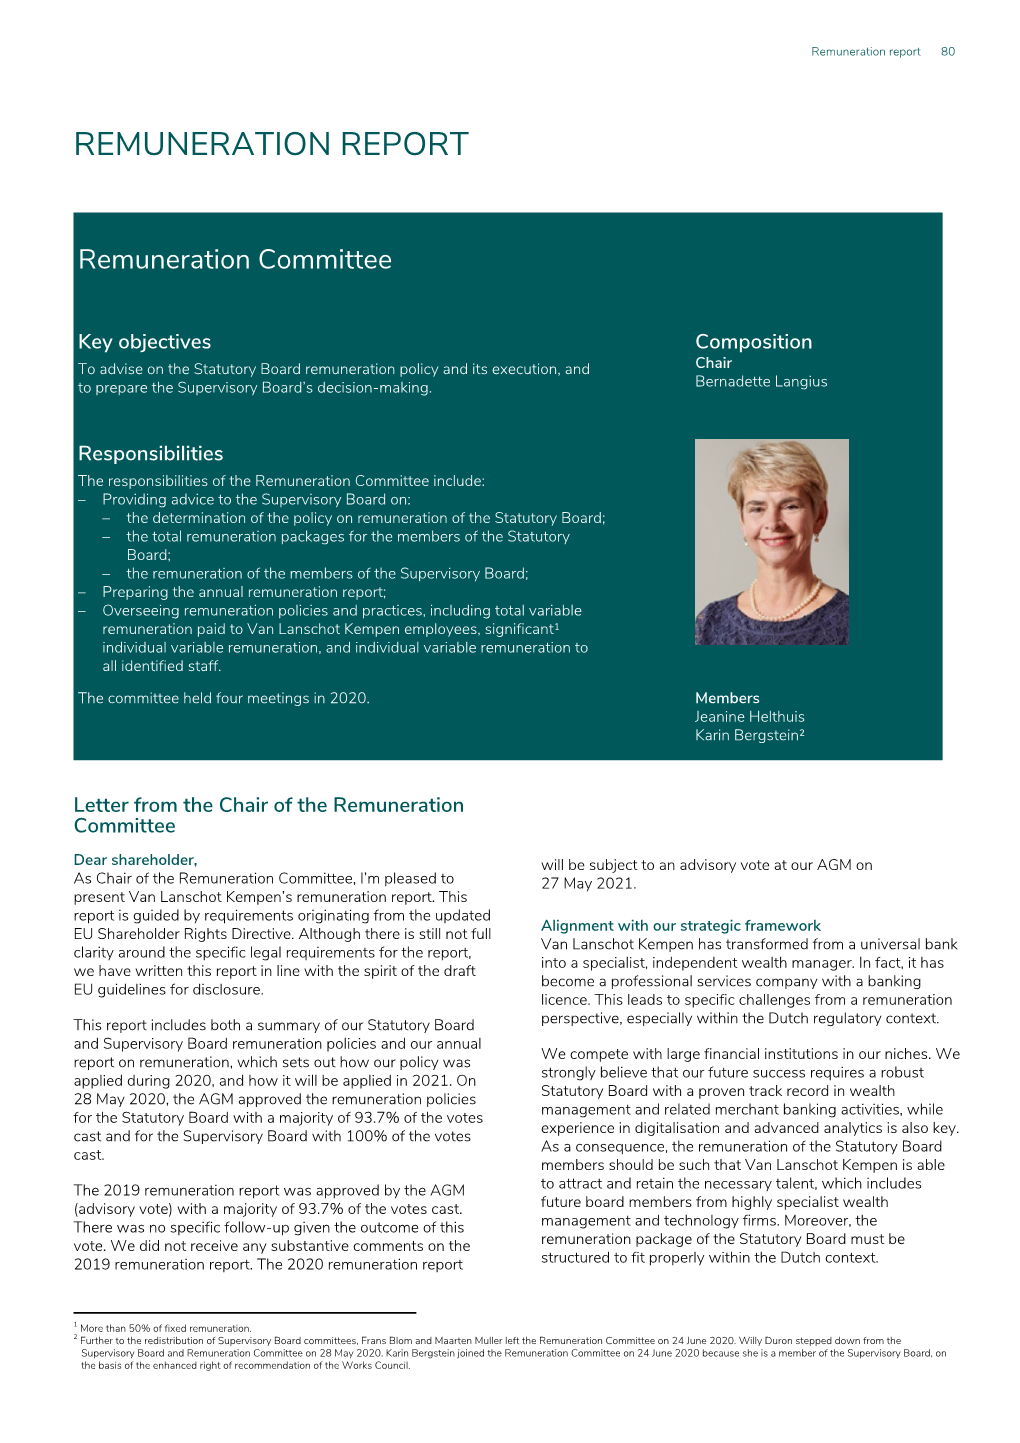 Remuneration Report. the 2020 Remuneration Report Structured to Fit Properly Within the Dutch Context